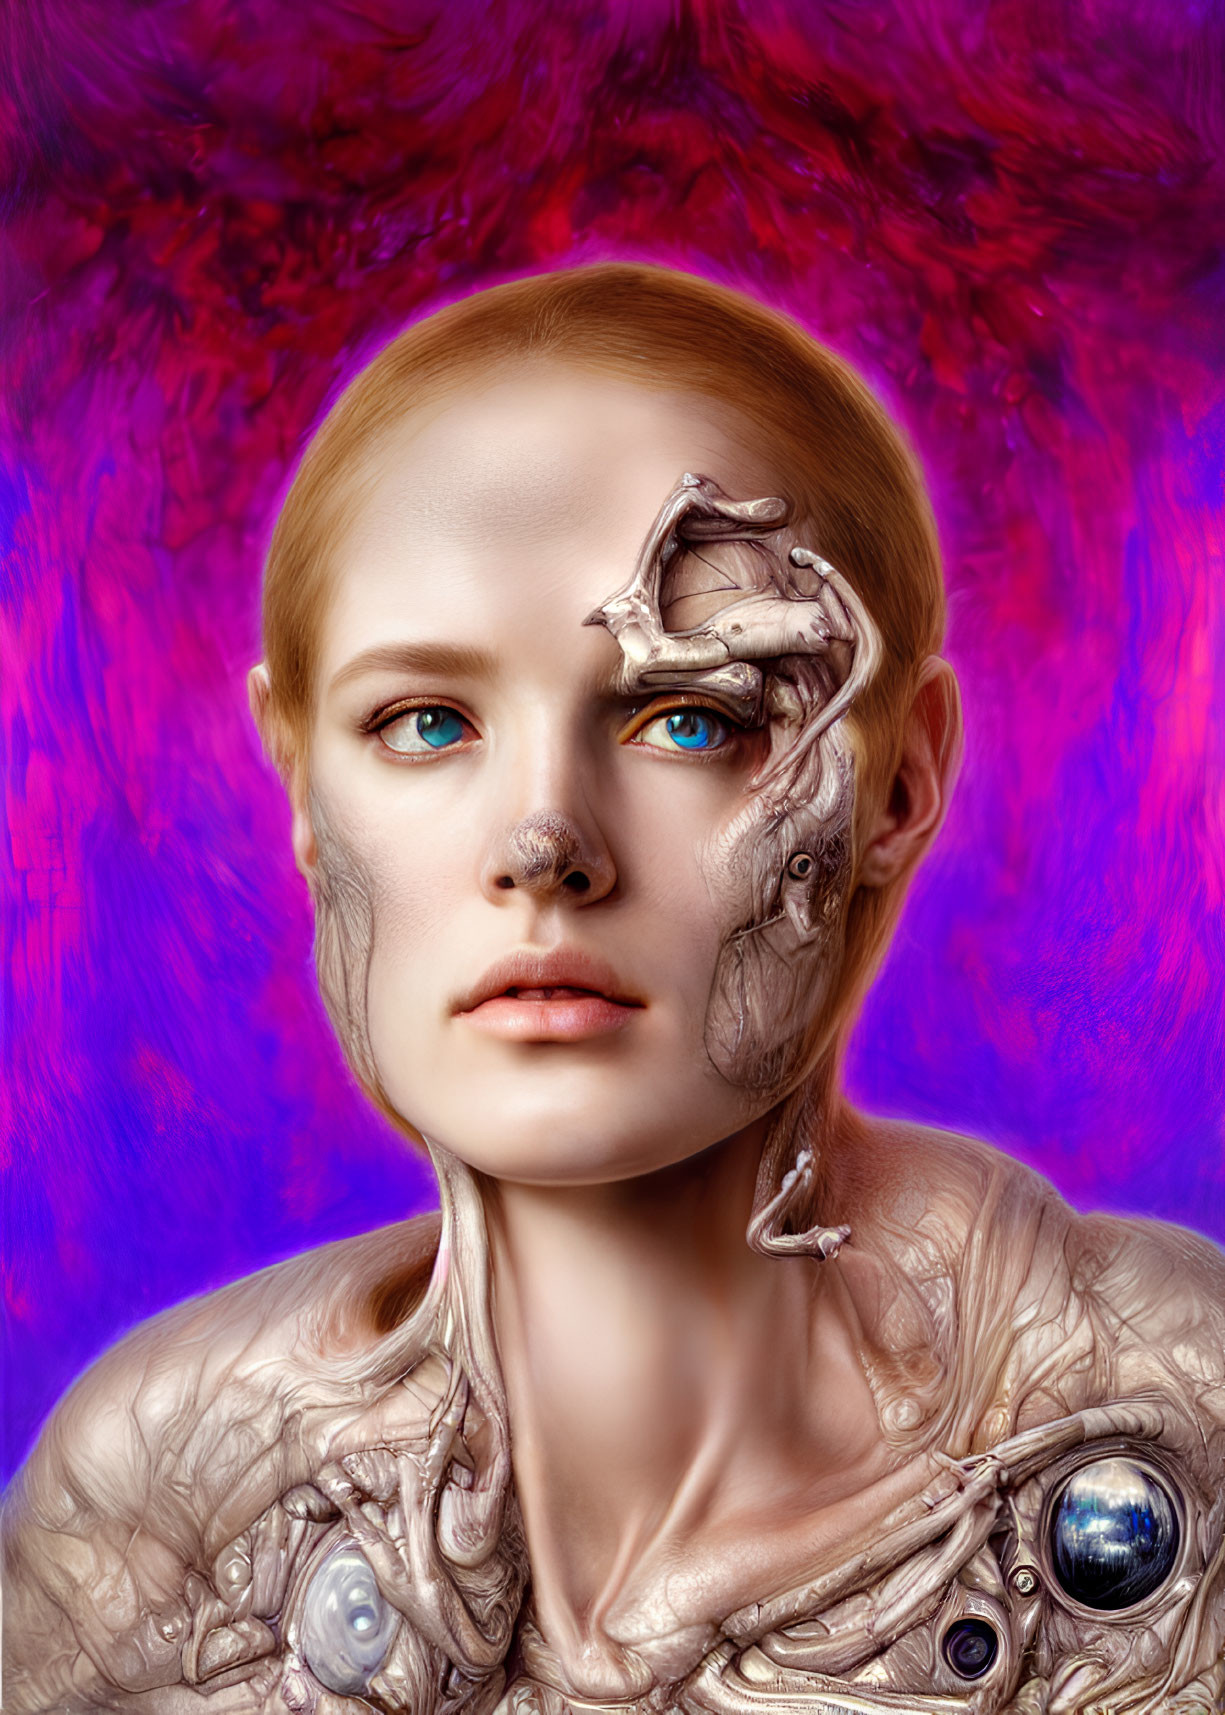 Surreal portrait: Woman with human-robotic blend on vibrant background